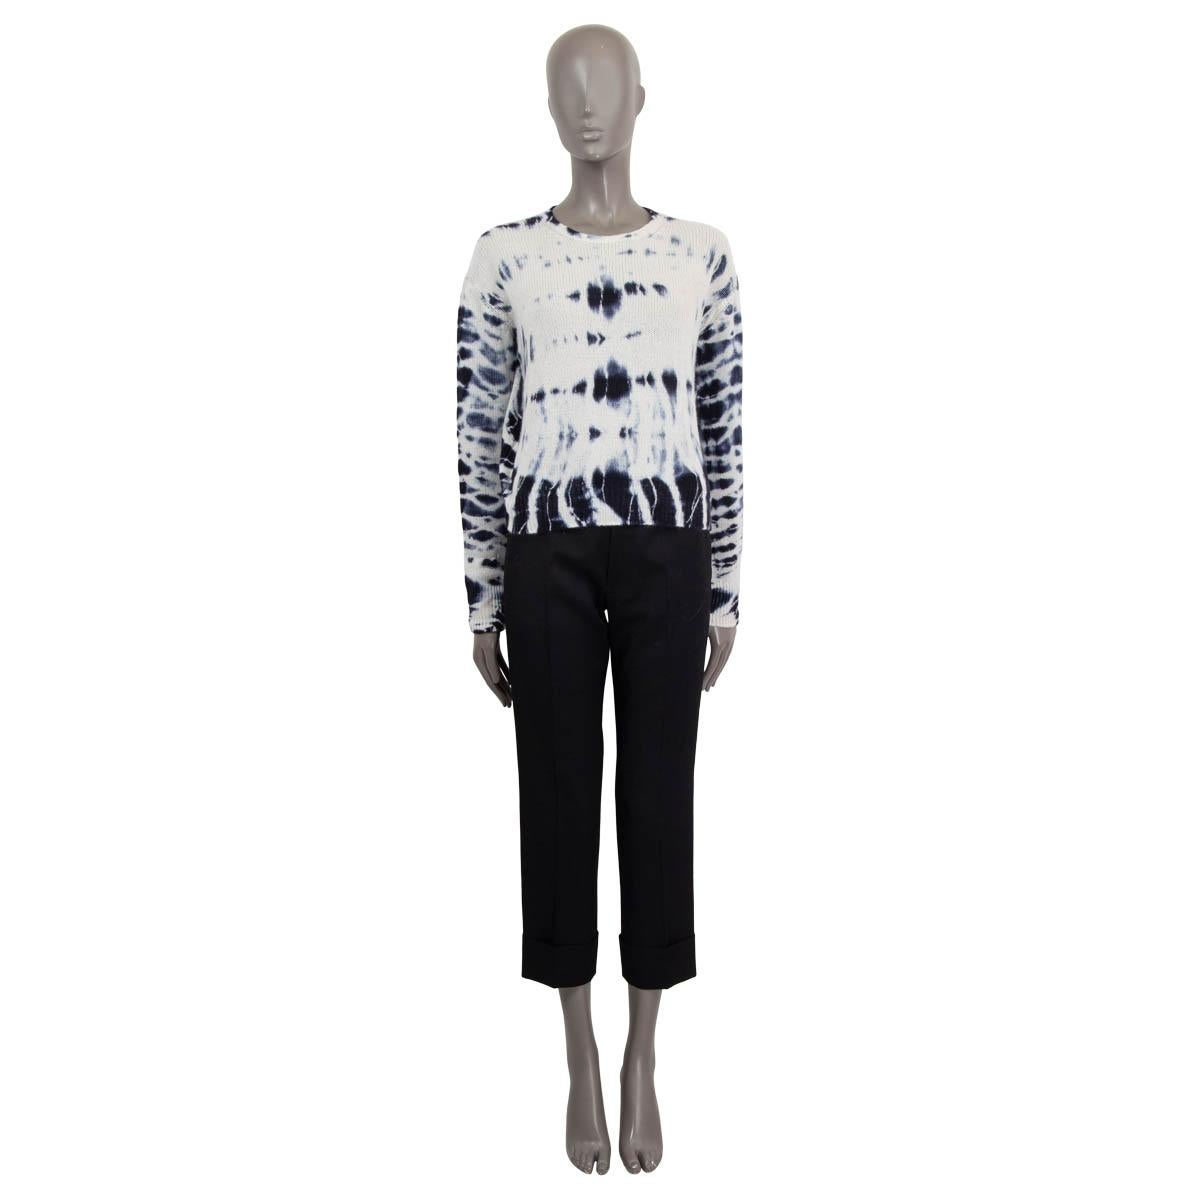 100% authentic Christian Dior Pre-Fall 2020 tie-dye sweater in off-white, blue and navy cashmere (100%). Features the CD signature at the back and long sleeves. Unlined. Has been worn and is in excellent condition.

Measurements
Tag